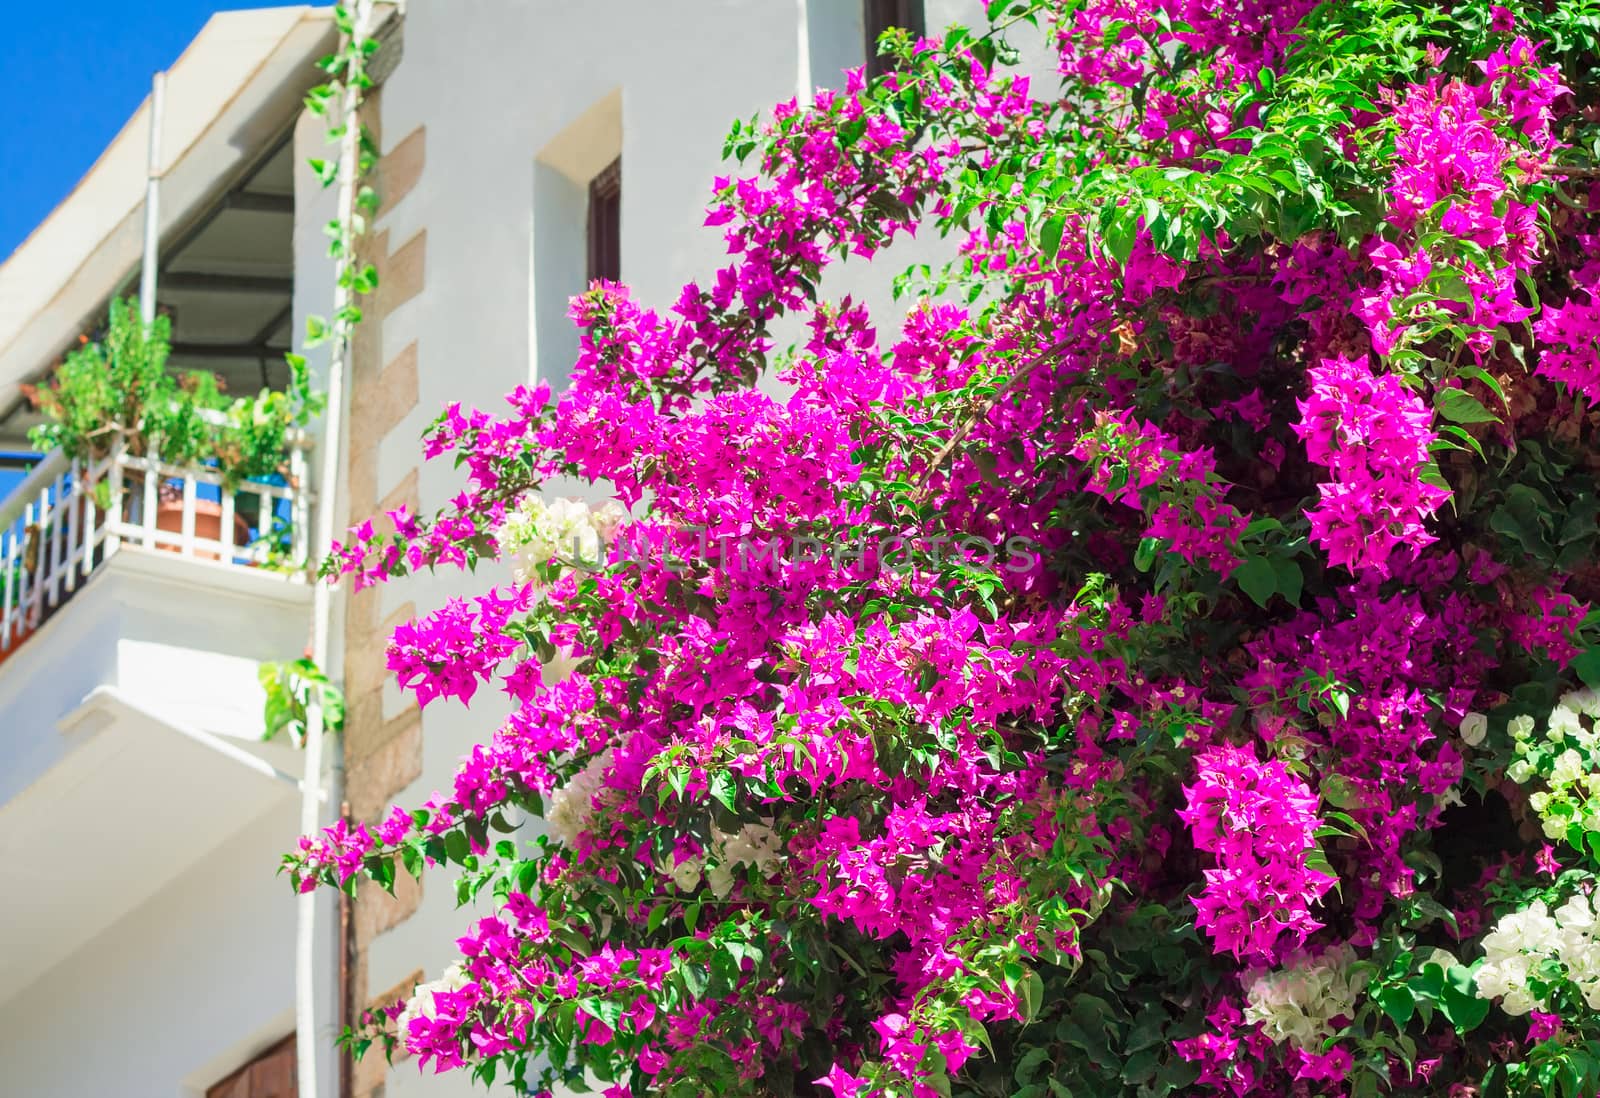 Building facade fragment on which balcony ornamental plants with a large amount of bright pink colors grow.